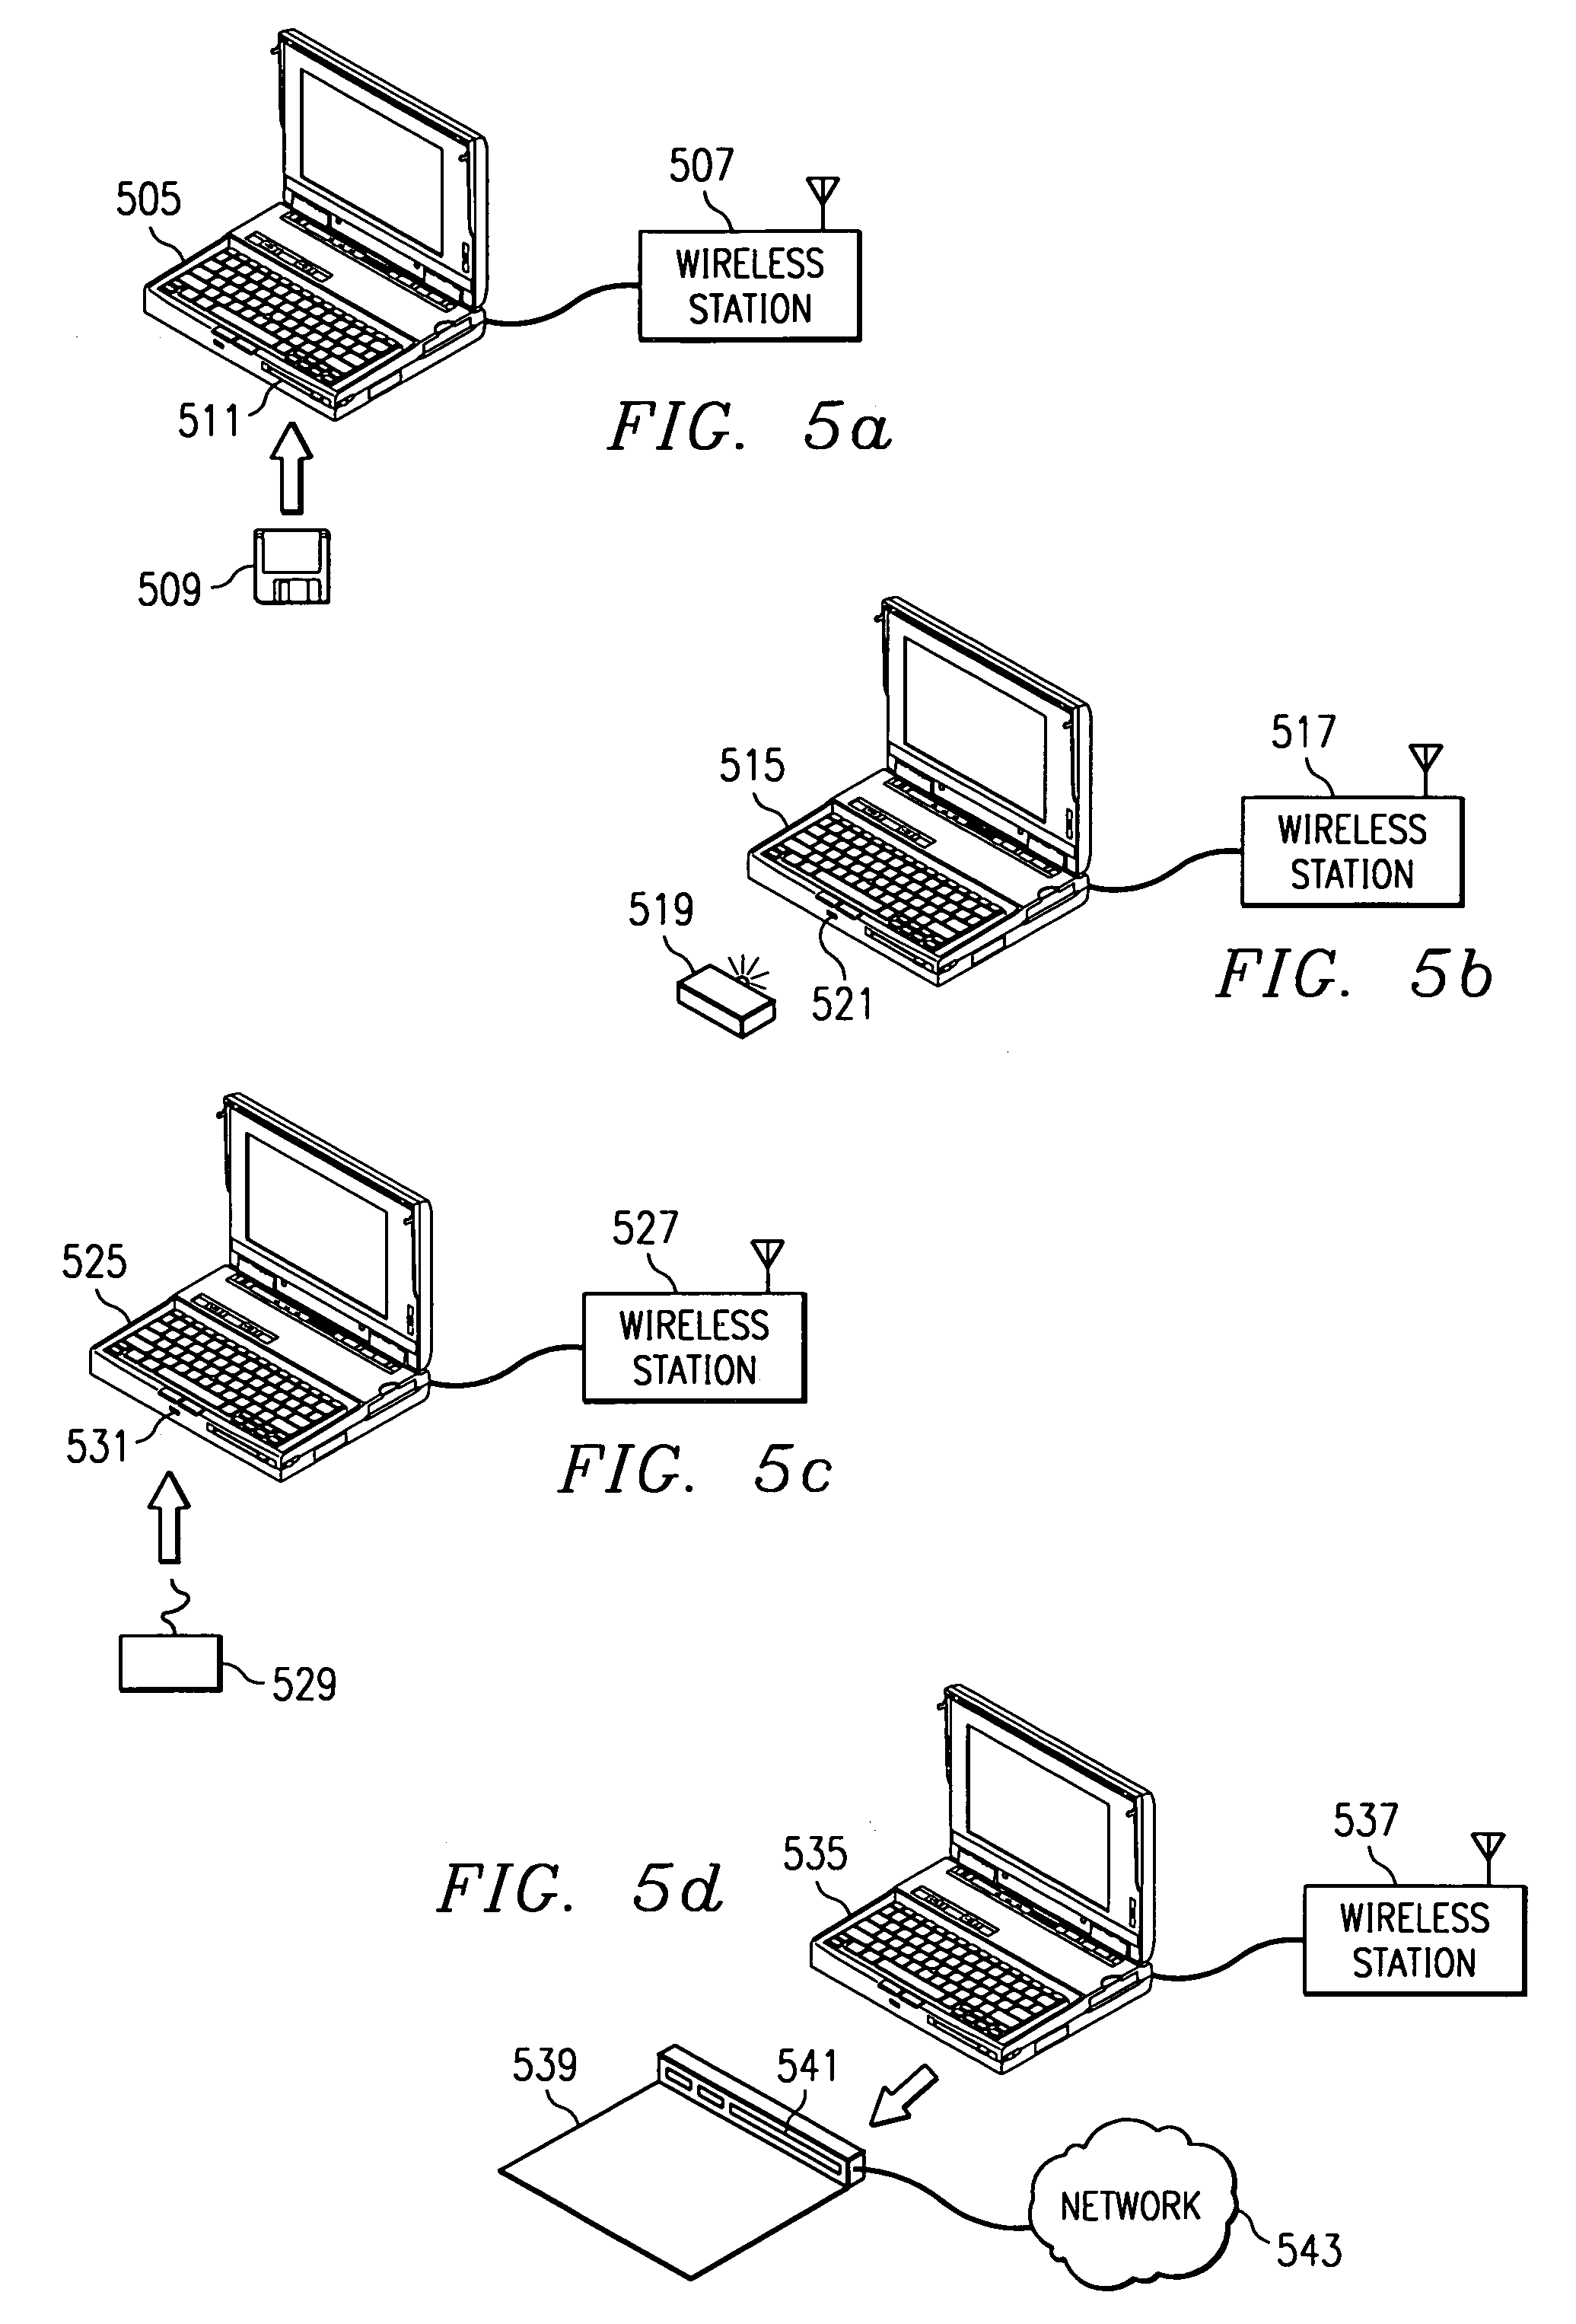 Method for physically updating configuration information for devices in a wireless network